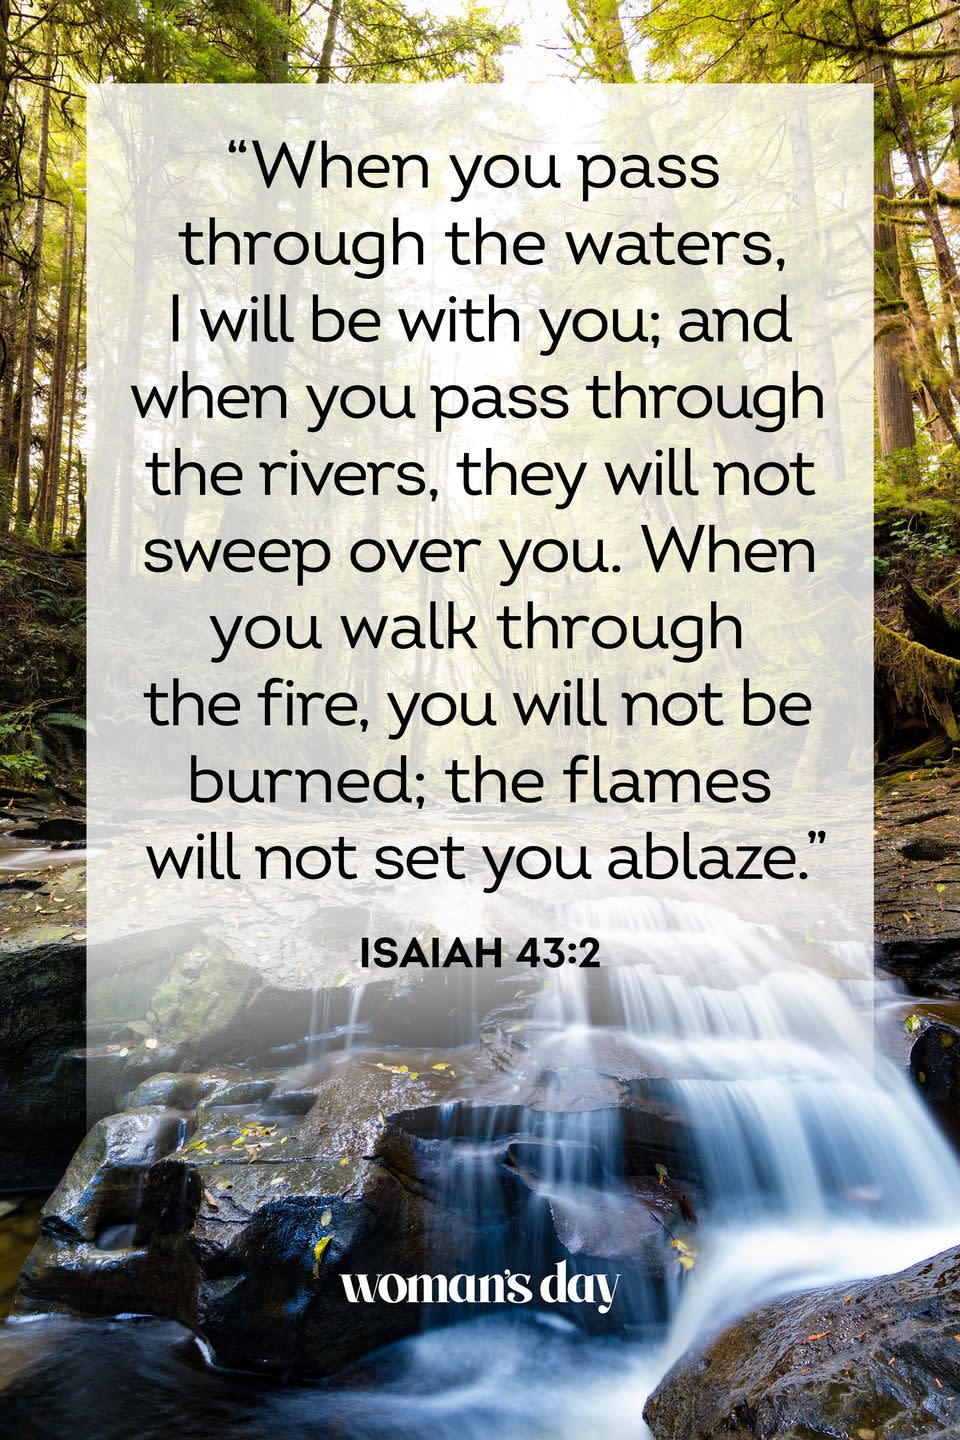 <p>"When you pass through the waters, I will be with you; and when you pass through the rivers, they will not sweep over you. When you walk through the fire, you will not be burned; the flames will not set you ablaze." <br><br><strong>The Good News: </strong>God is promising that, if we truly trust in him, he will be able to protect us and see us through life's tribulations. <br></p>